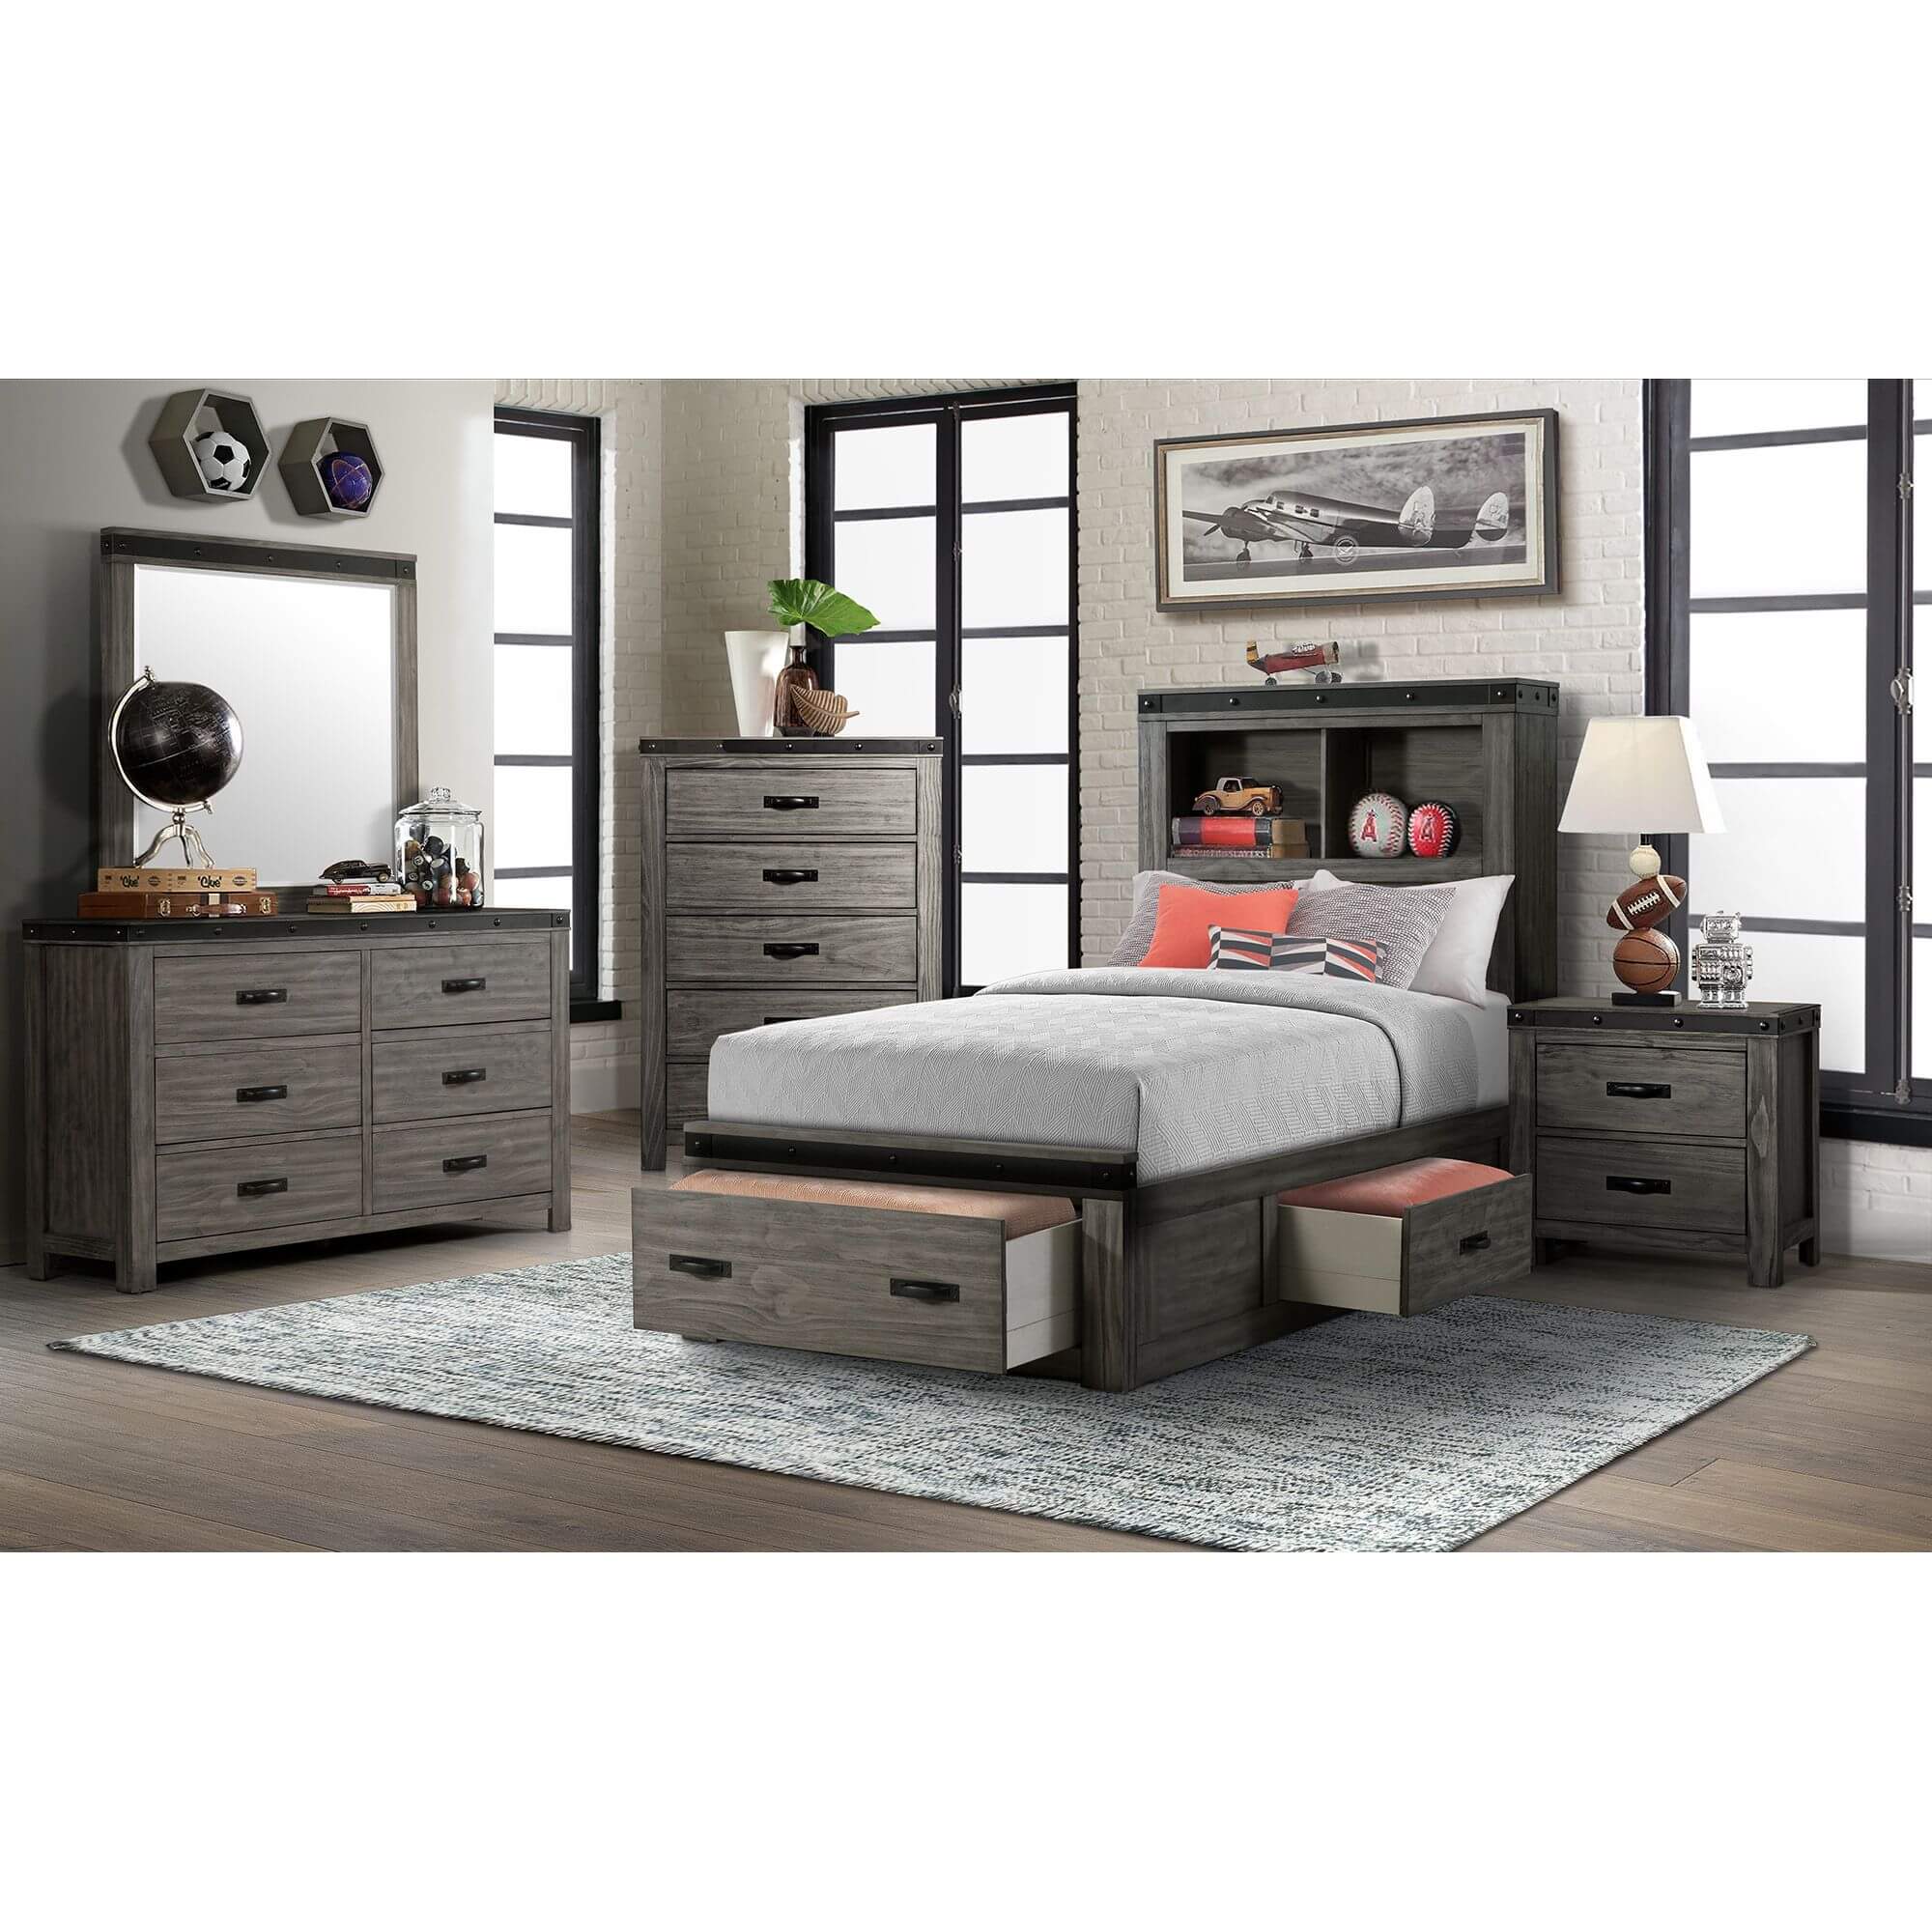 Cheap Twin Bed Sets Off 51 Online Shopping Site For Fashion Lifestyle